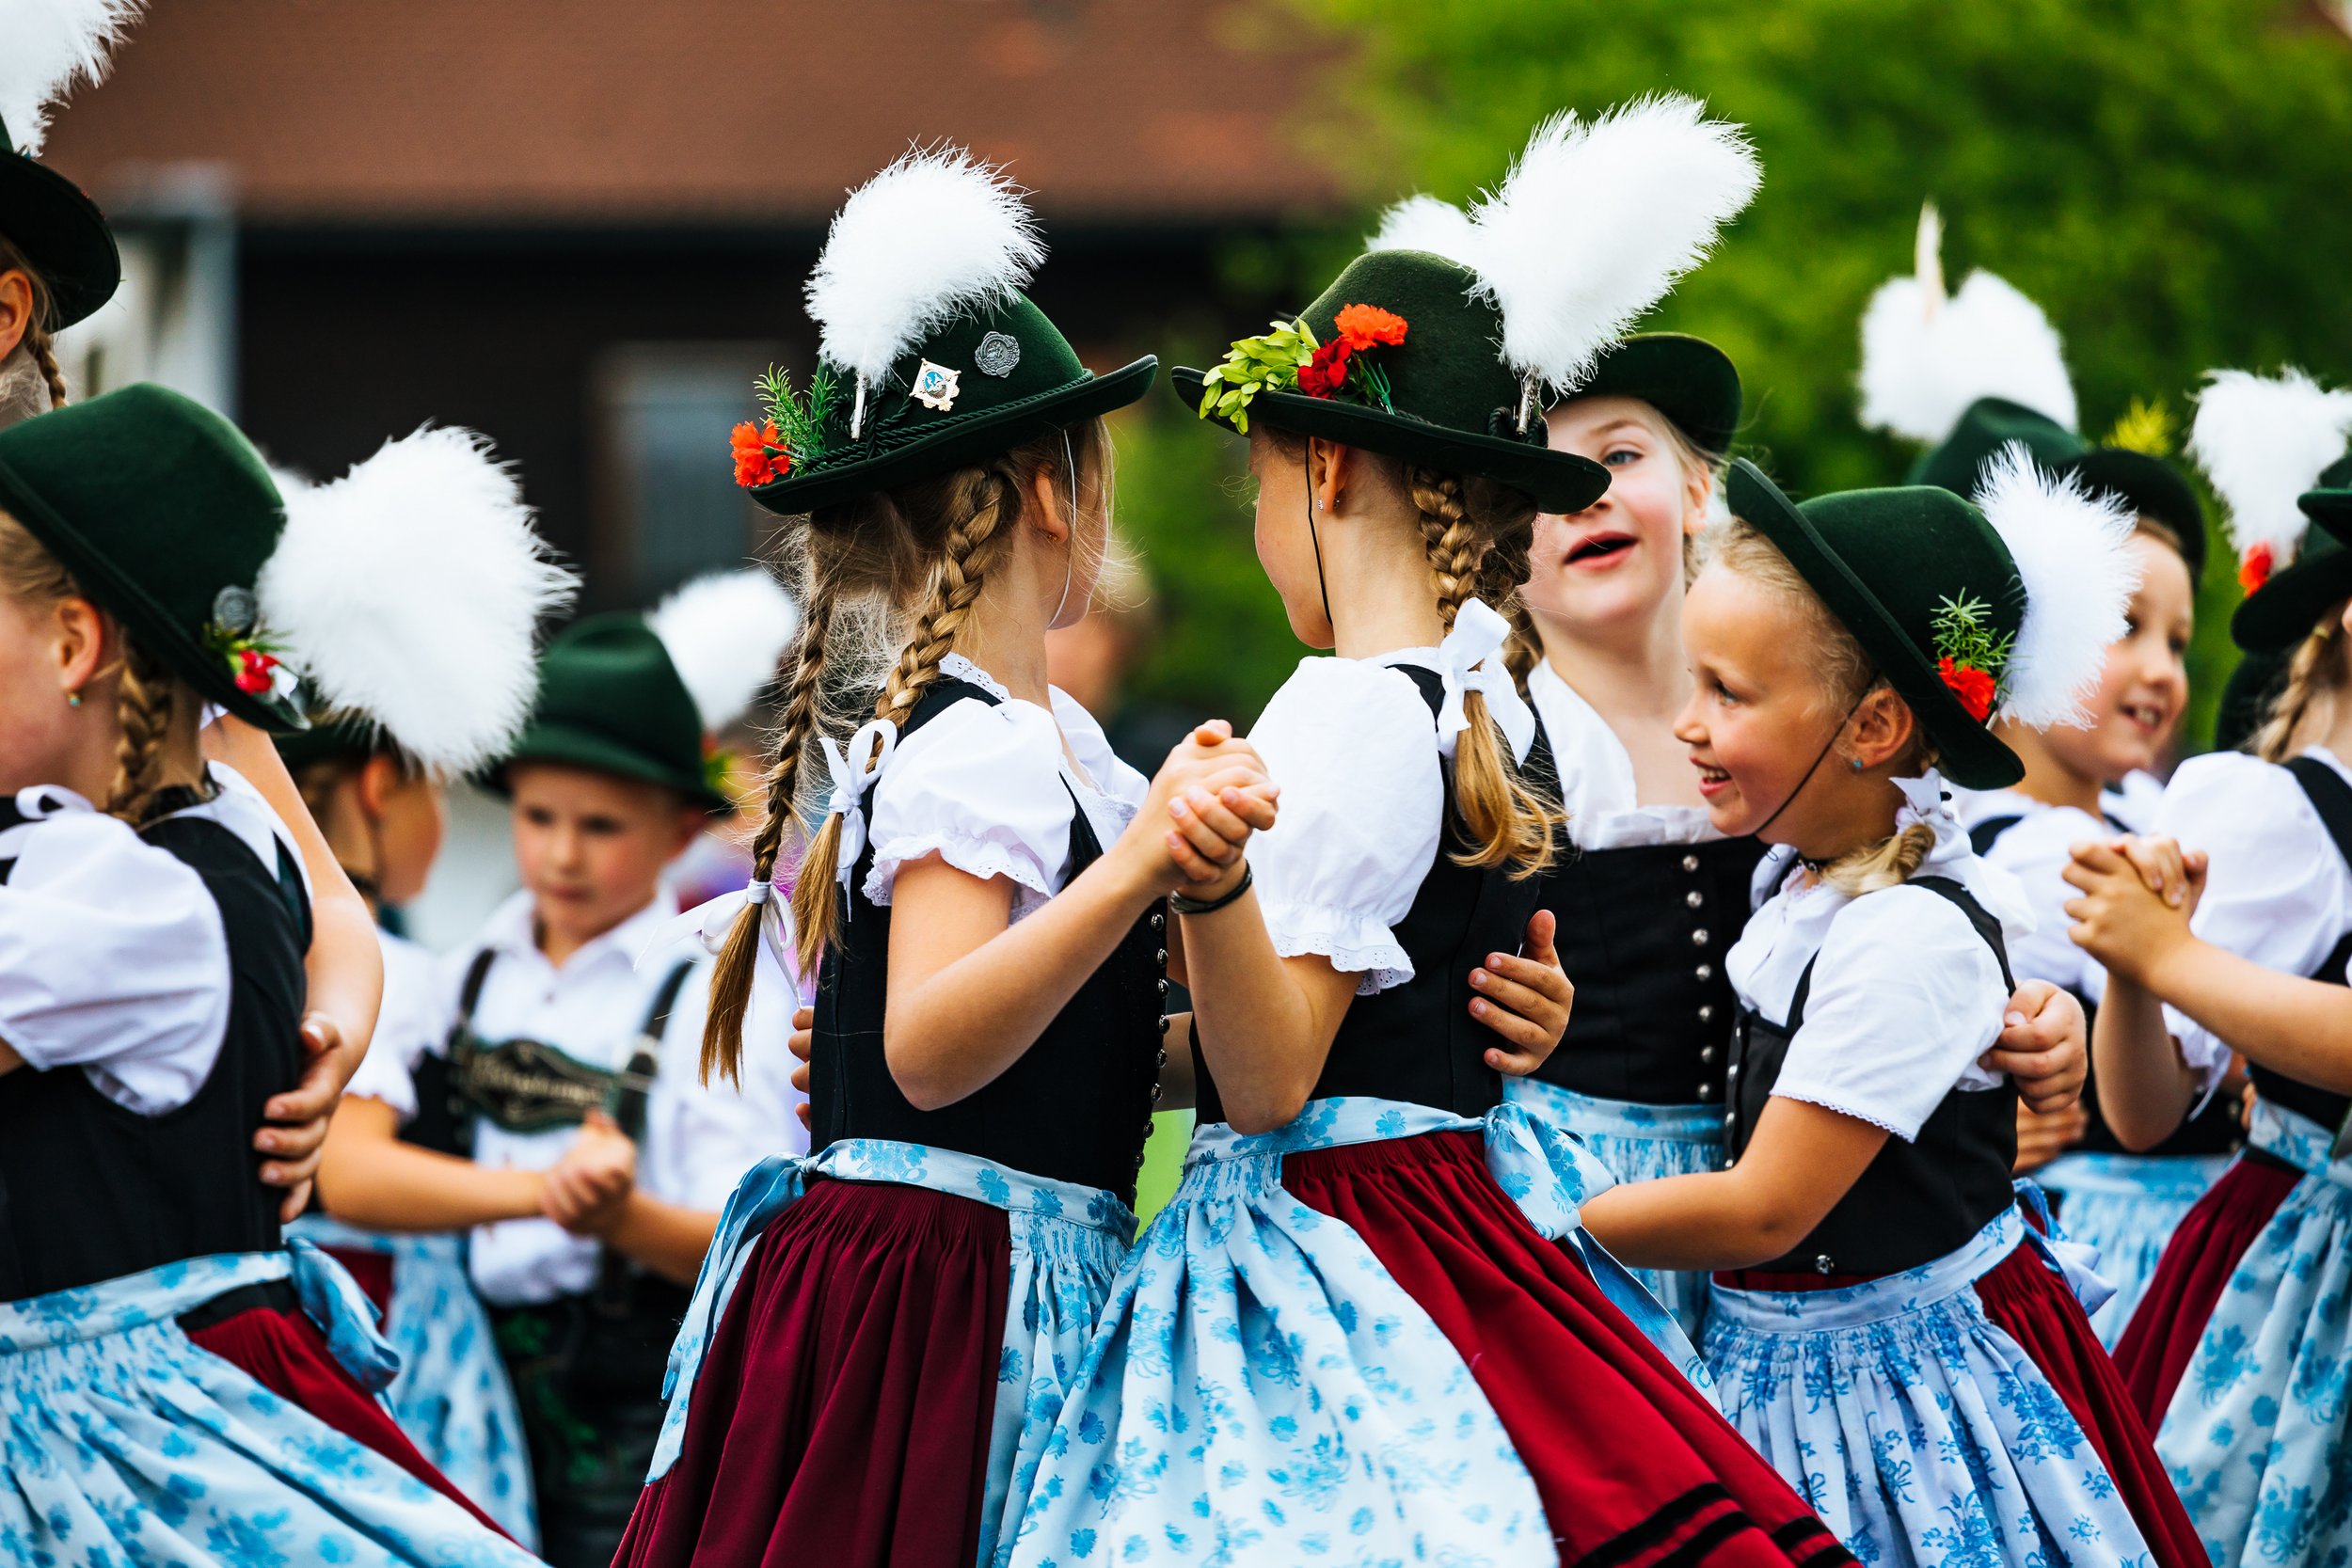 Children's dance at the Pfingstroas in Inzell